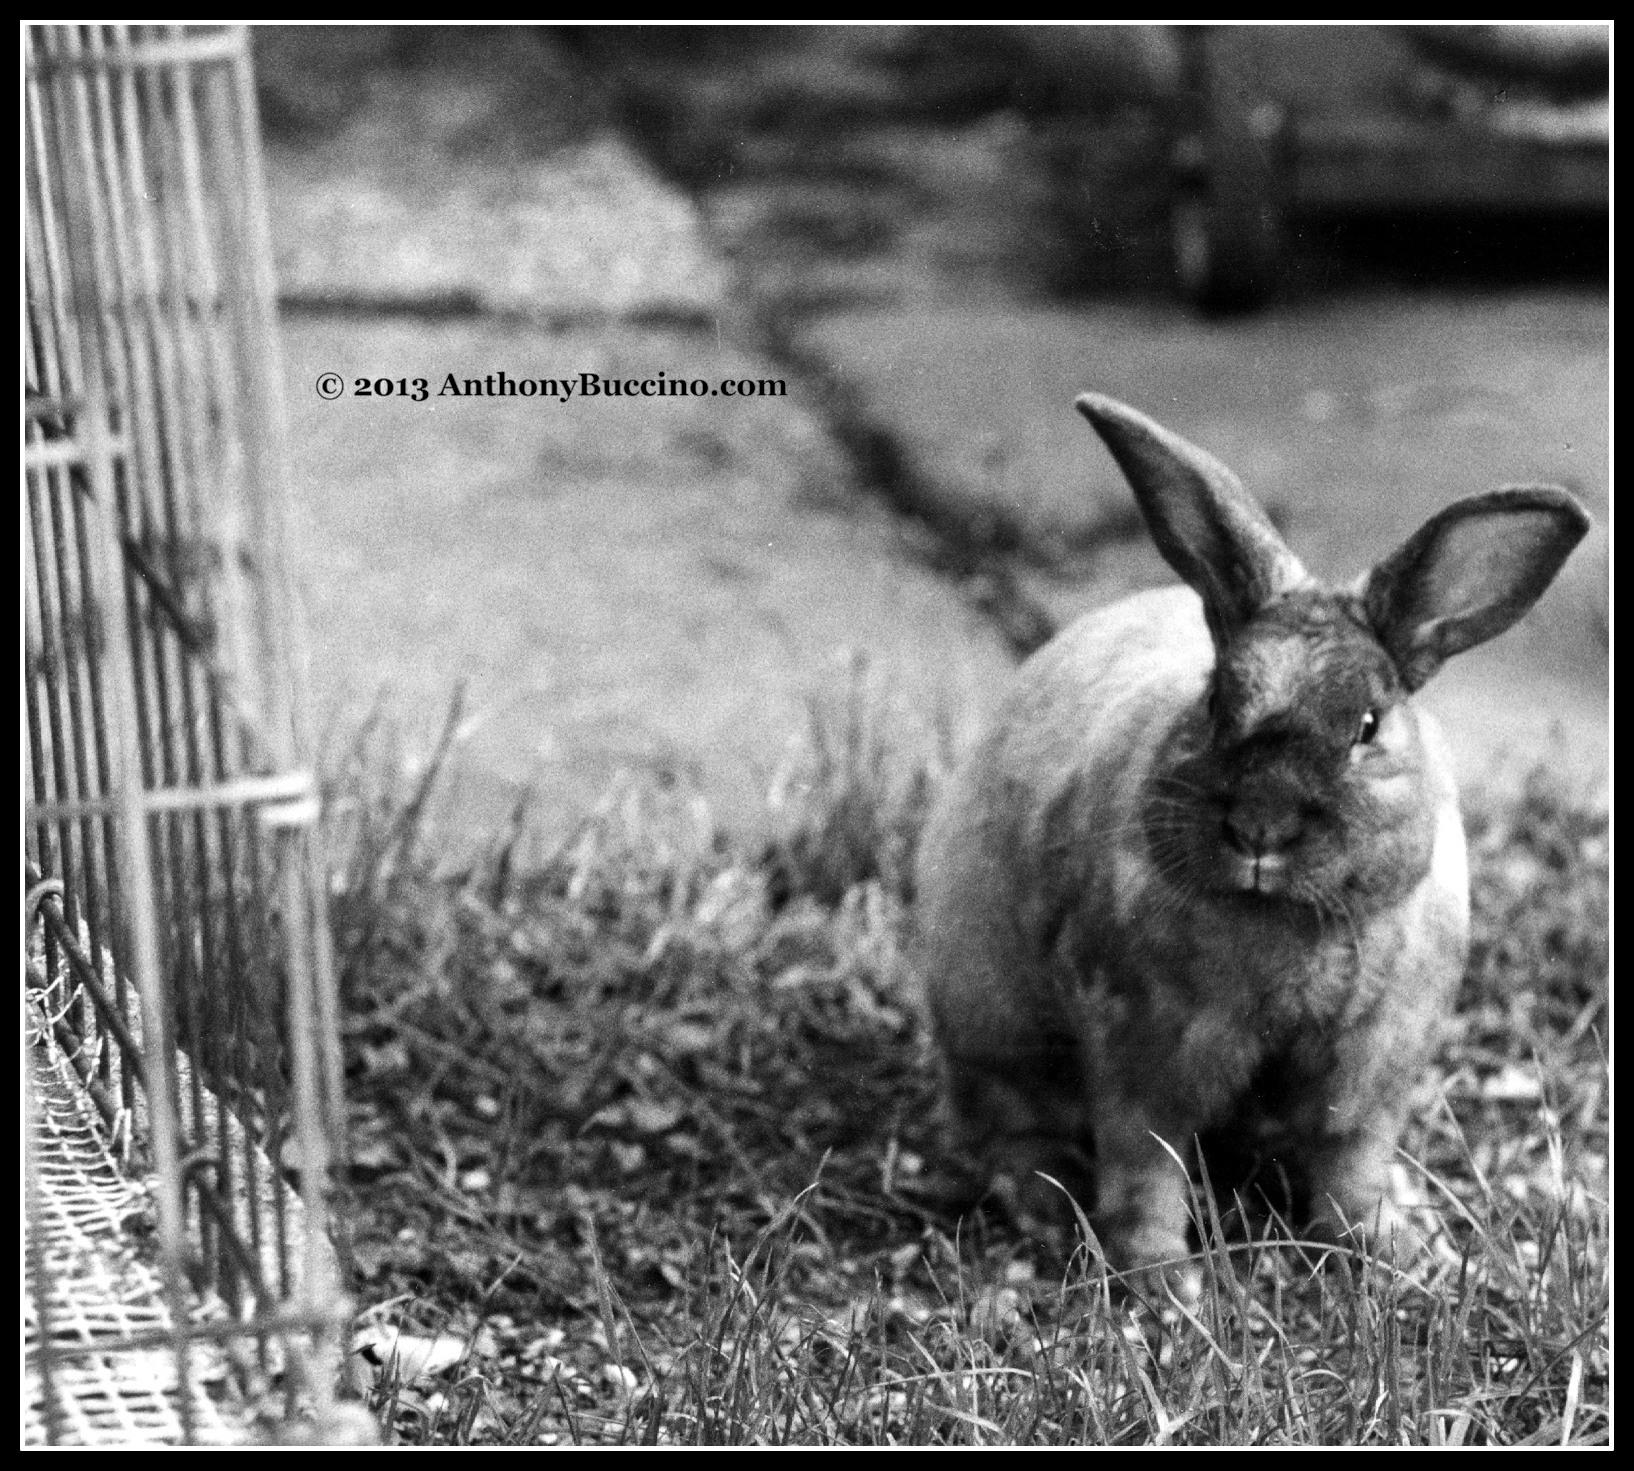 Murphy the rabbit, photo by Anthony Buccino, all rights reserved